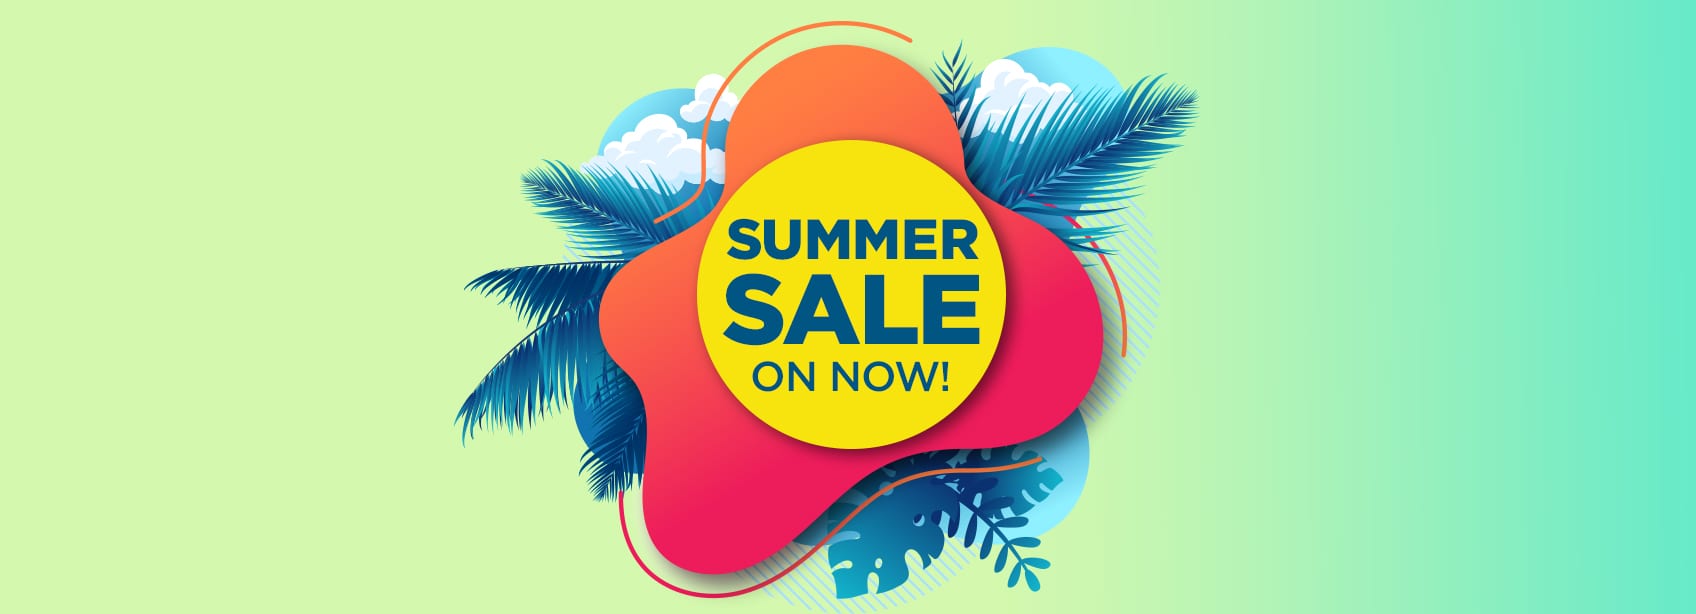 Wex Photo Summer Sale Offers